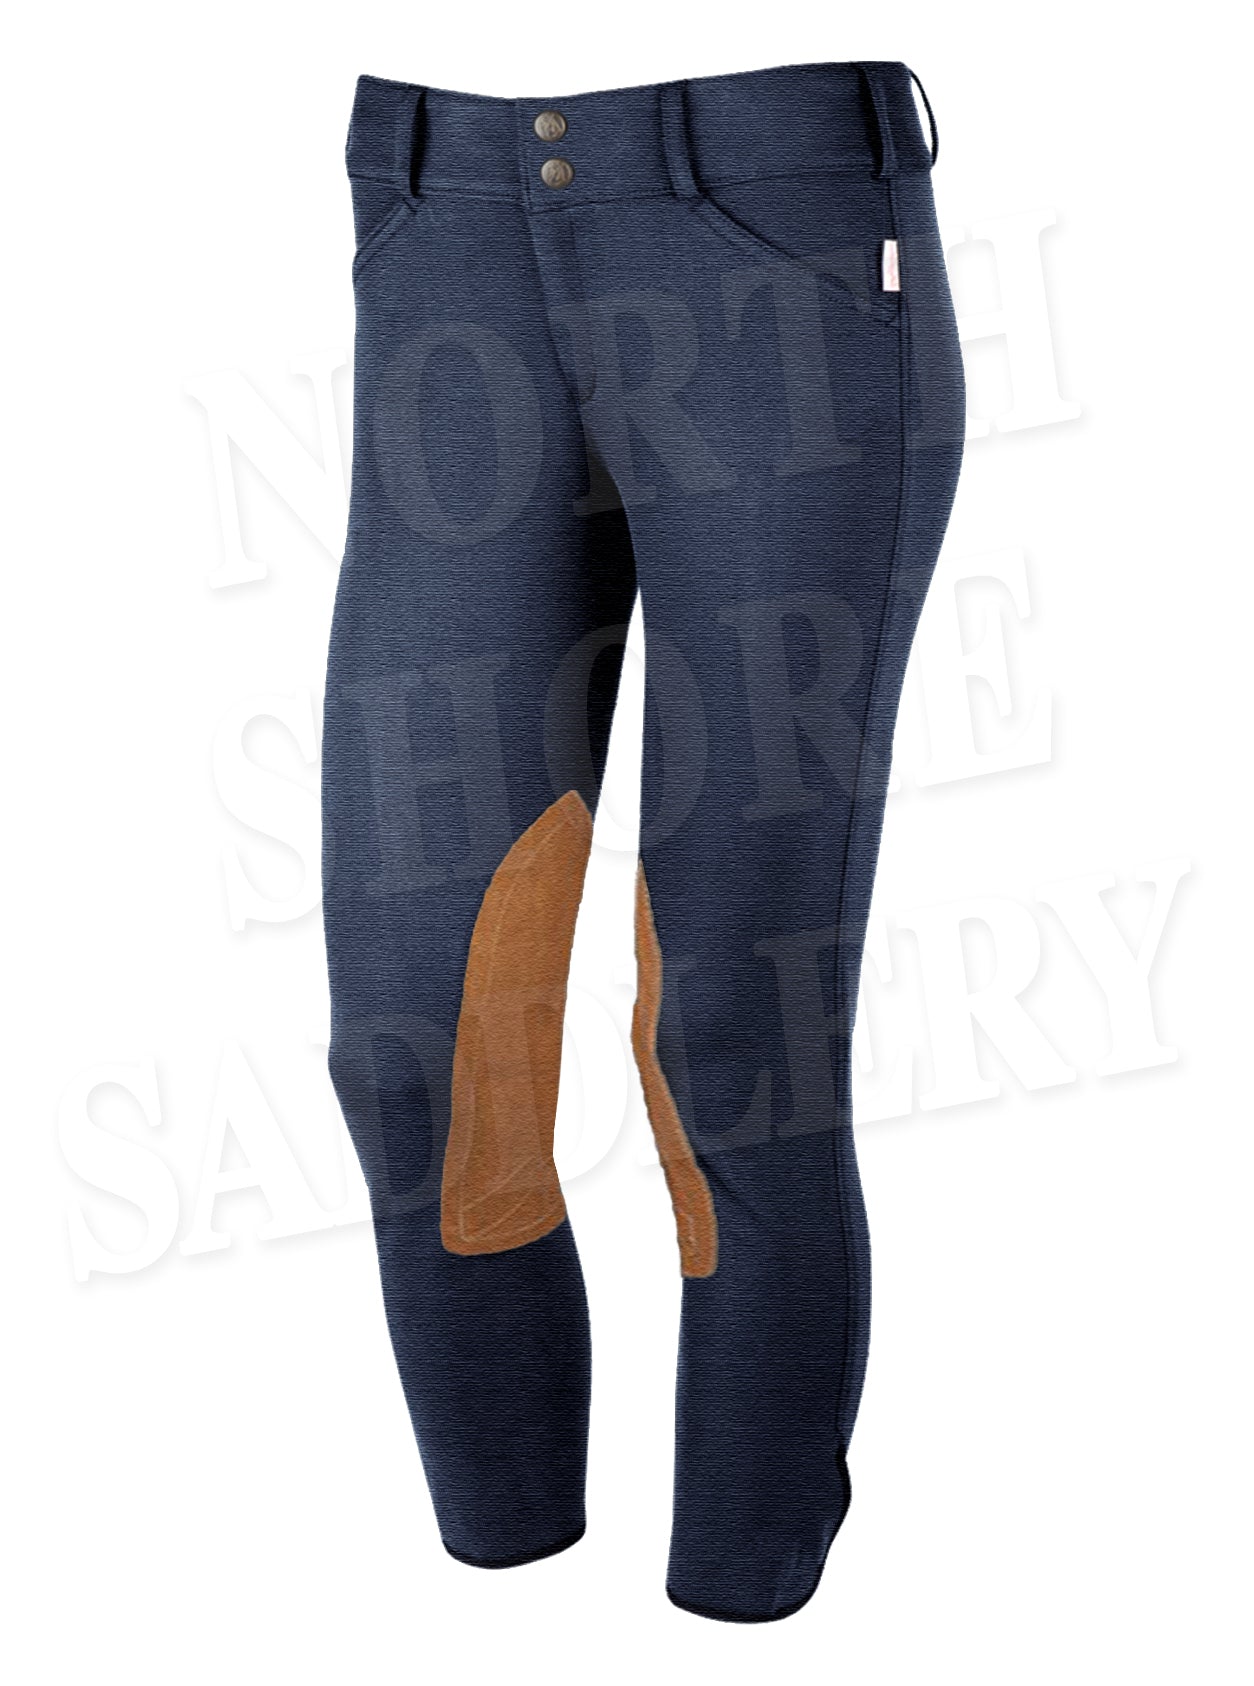 Tailored Sportsman Low Rise Front Zip Breech Denim with Tan Knee Patches - North Shore Saddlery